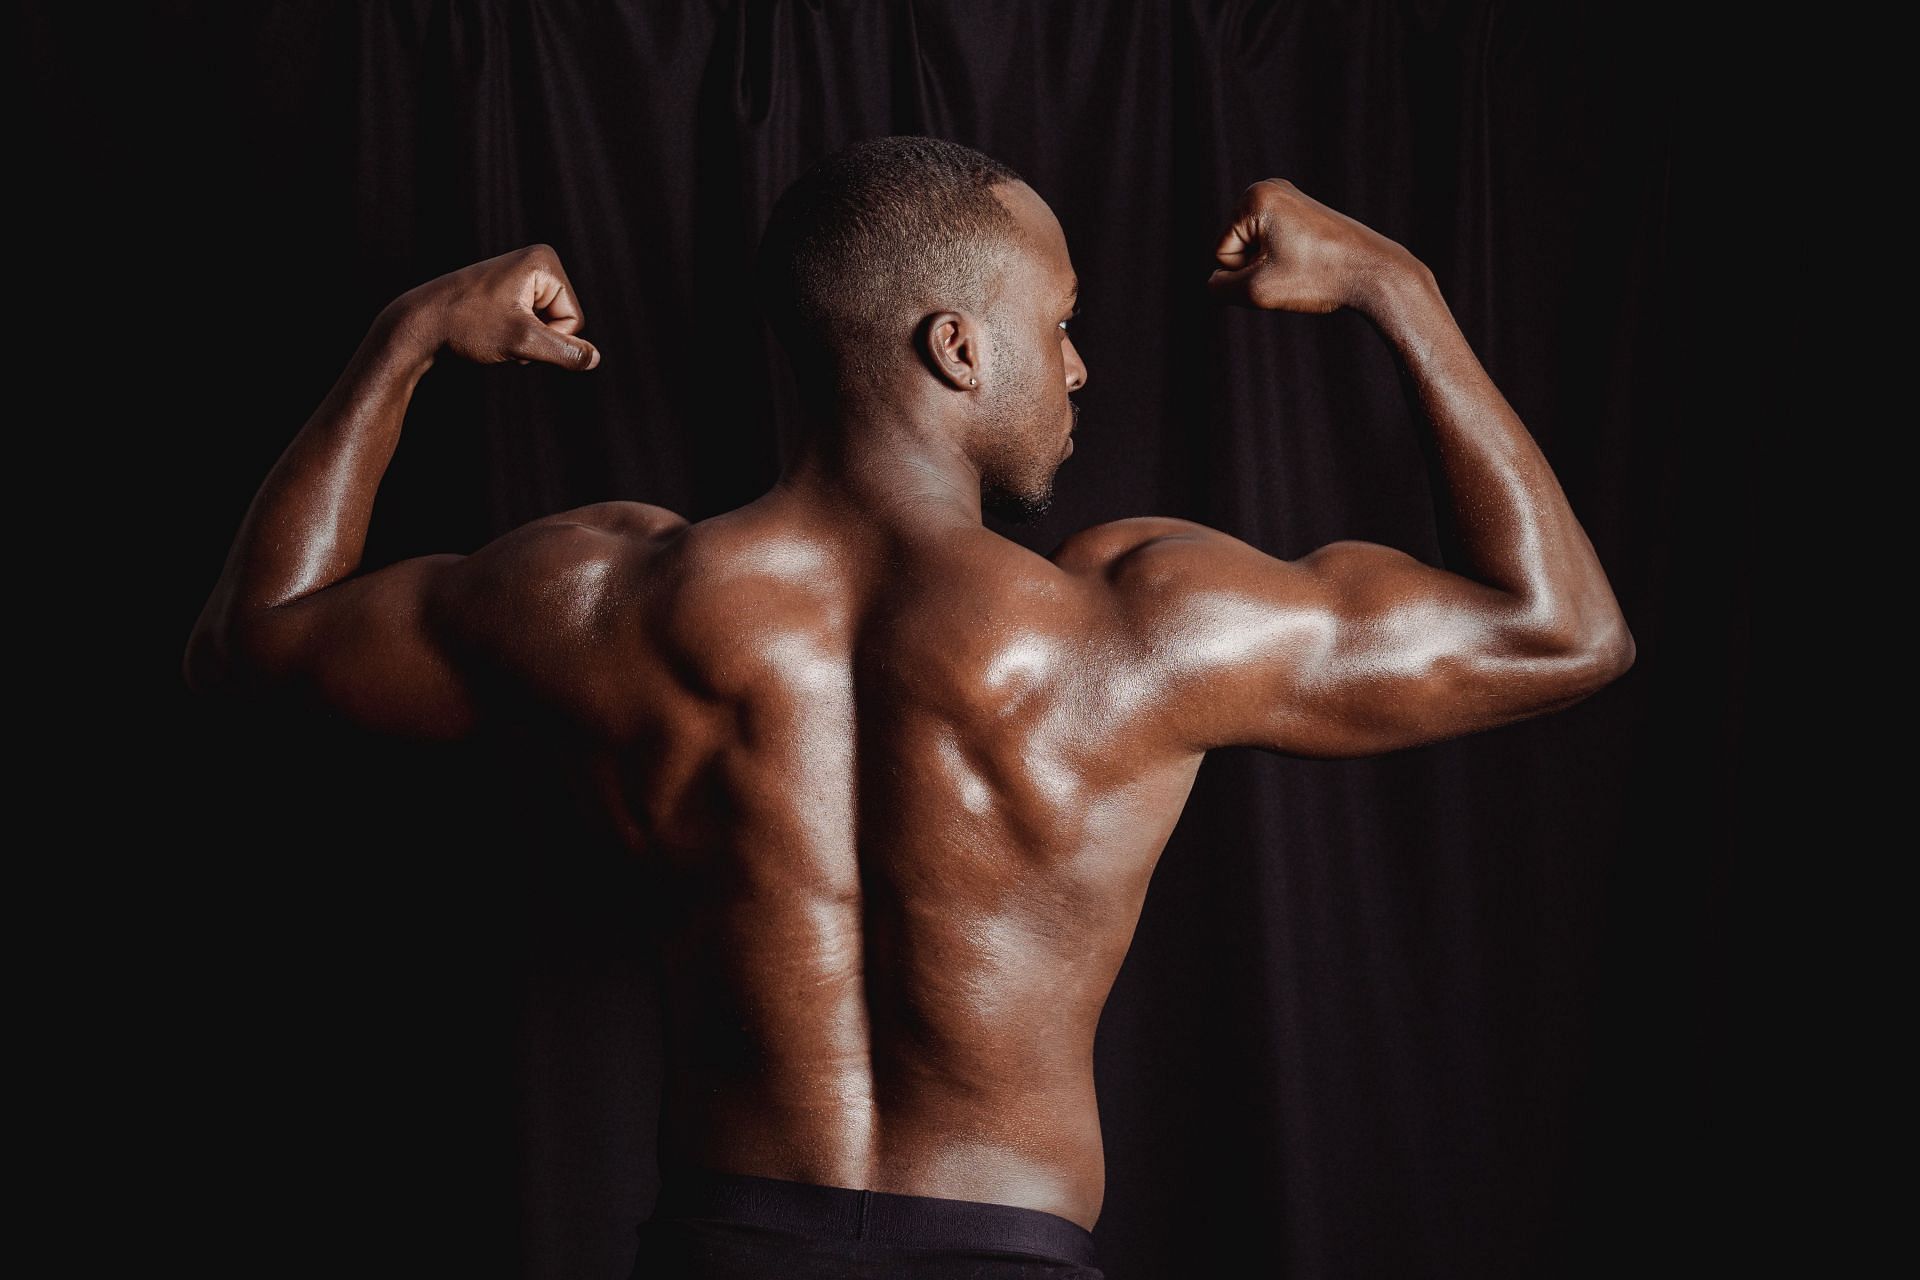 targeting the back muscles with lower lats exercises might be challenging for many lifters. (Image via Pexels/ Mike Jones)